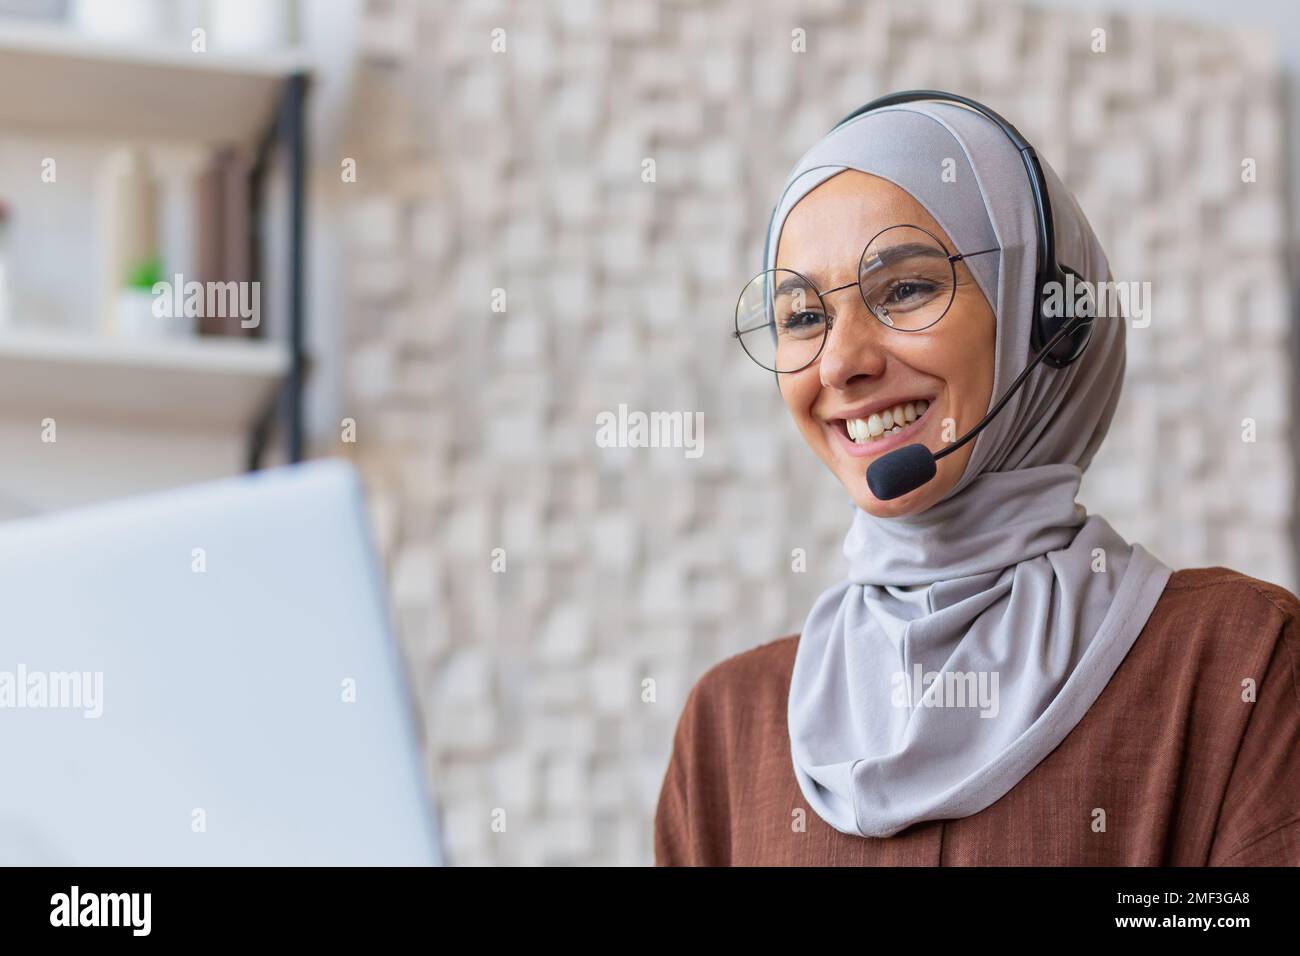 Joyful woman in hijab working from home remotely, Muslim woman talking on video call using headset and laptop, businesswoman working remotely at home. Stock Photo